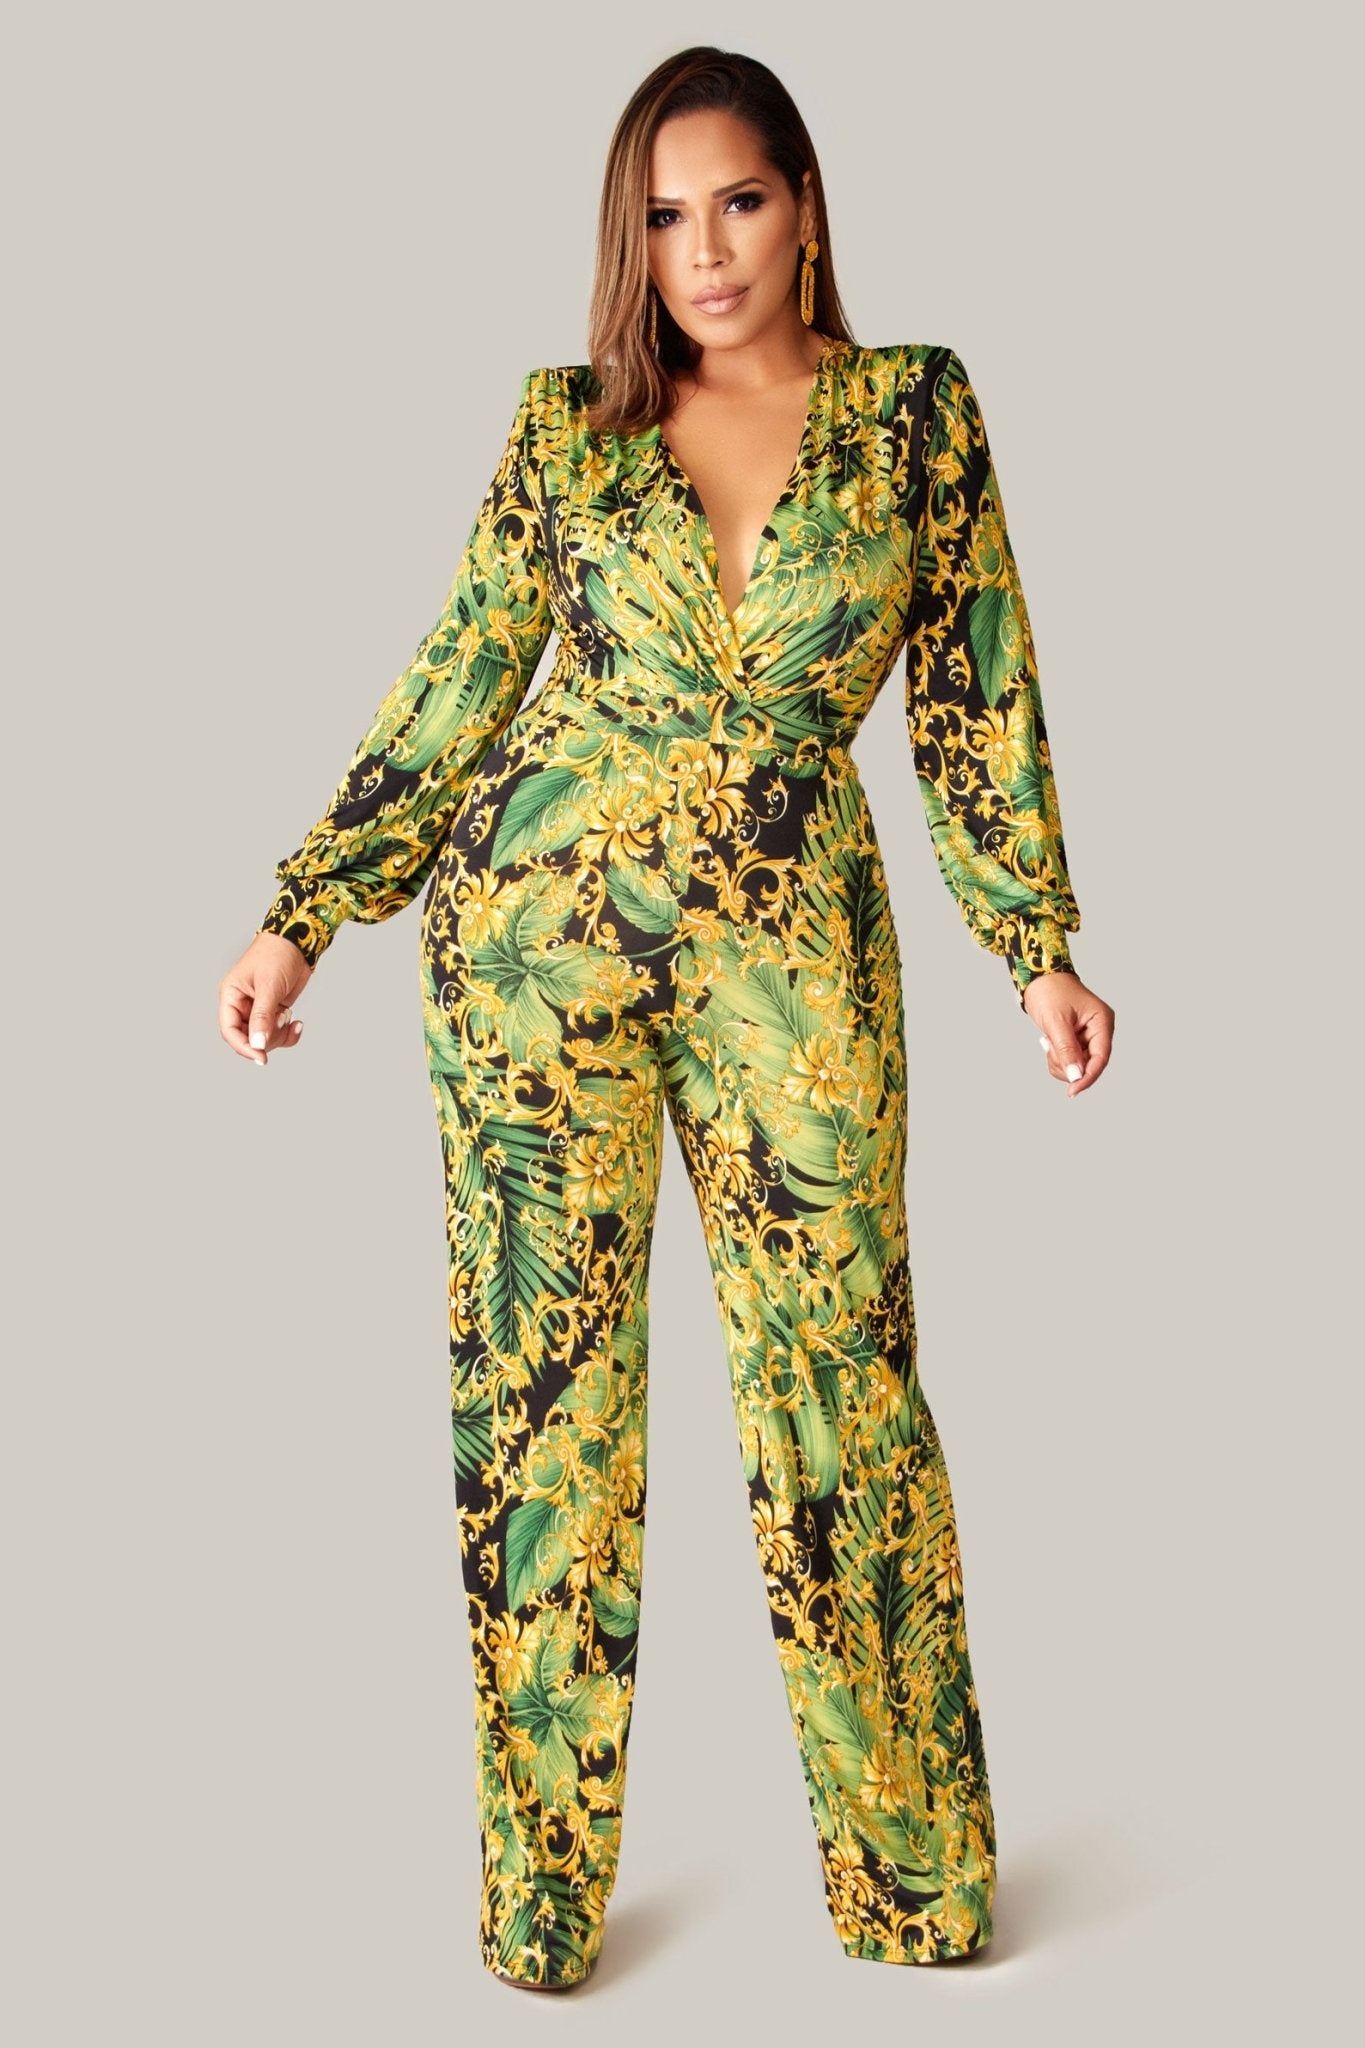 Tiffany Baroque Print Jumpsuit - MY SEXY STYLES